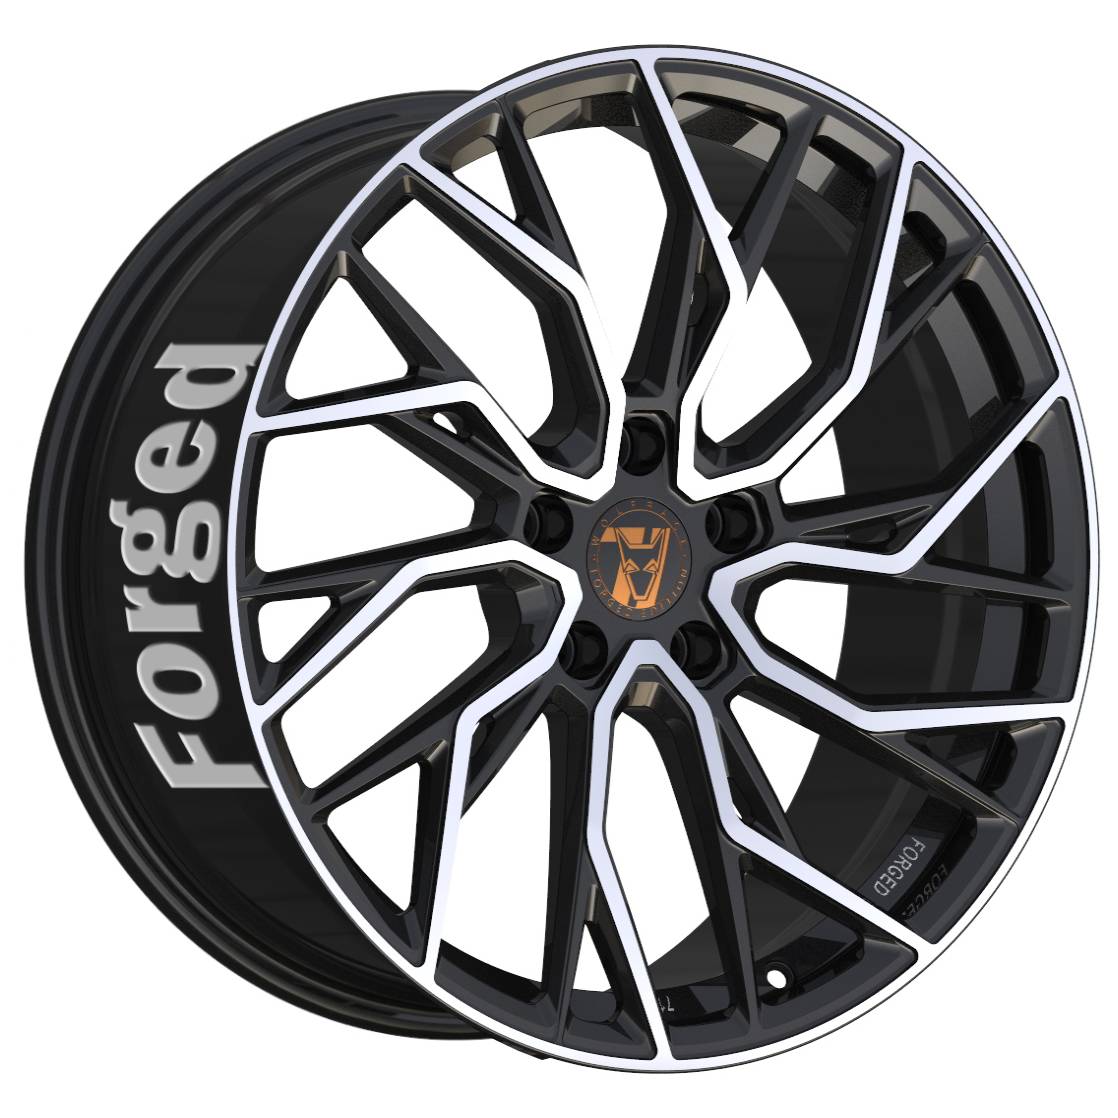 Demon Wheels 71 Forged Edition Voodoo Forged [13x24] -5x114.3- ET 20